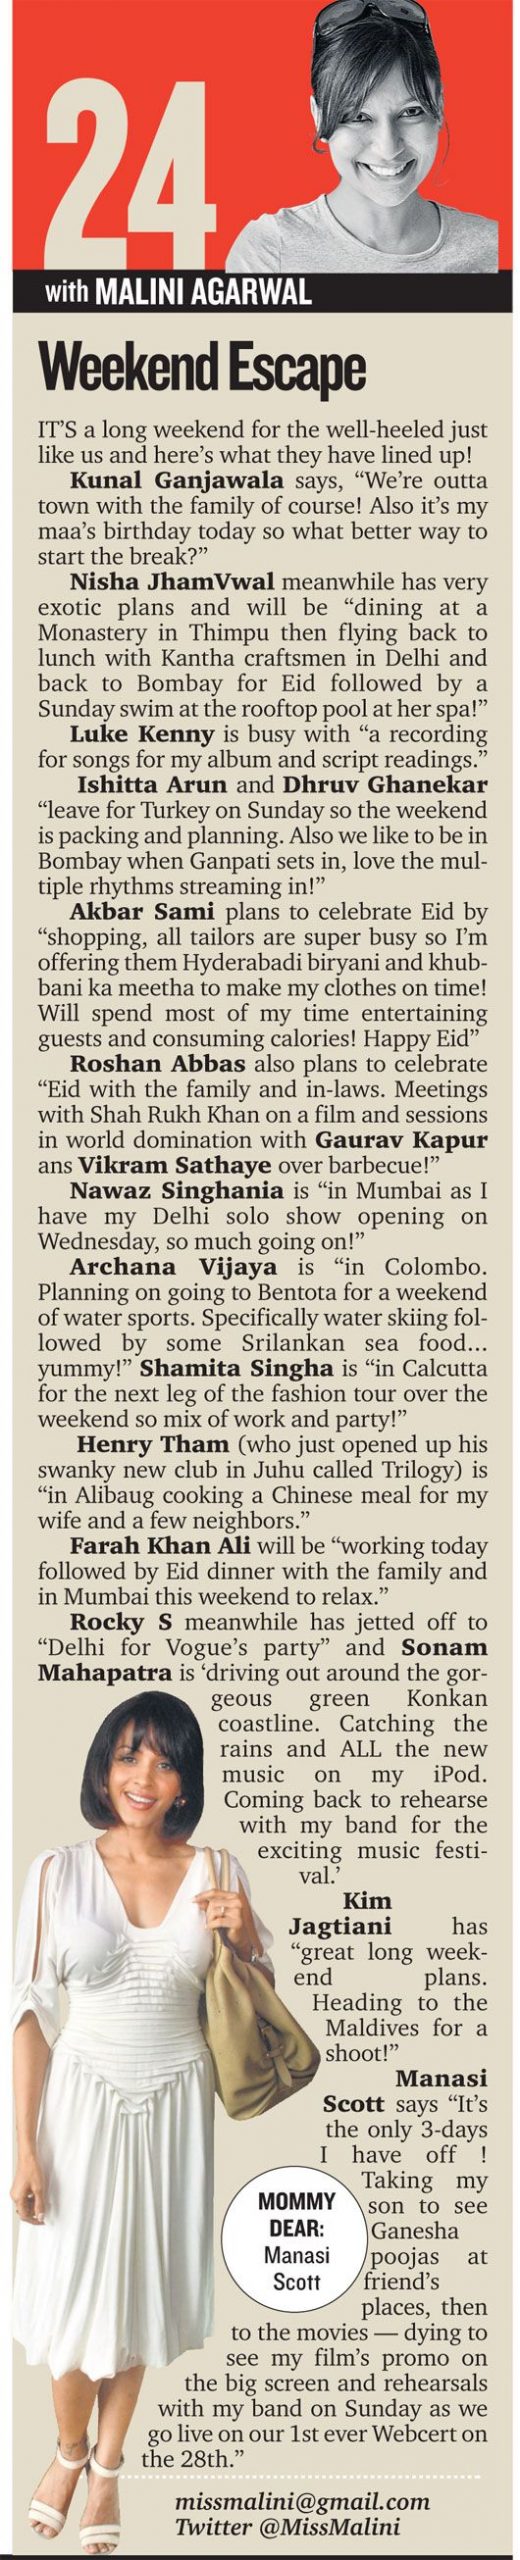 MissMalini in Mid Day: Celebrity Weekend Escapes